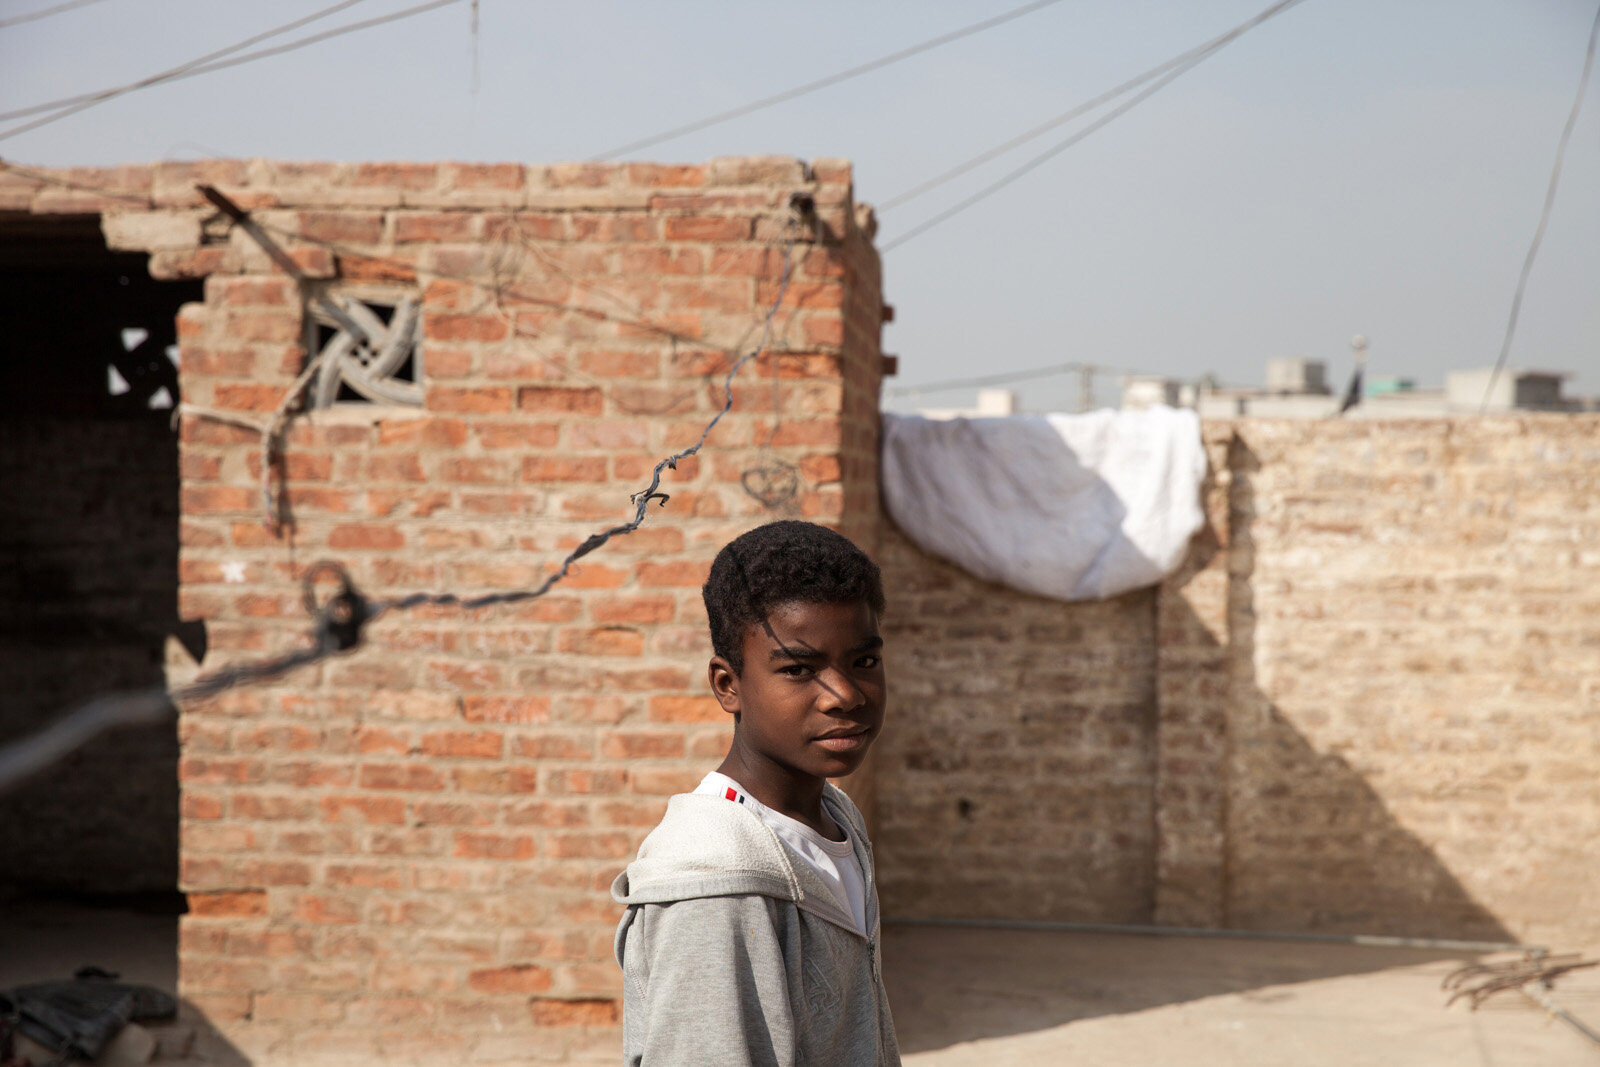 A Sheedi boy stands on the roof of his house in a suburb of Hyderabad.